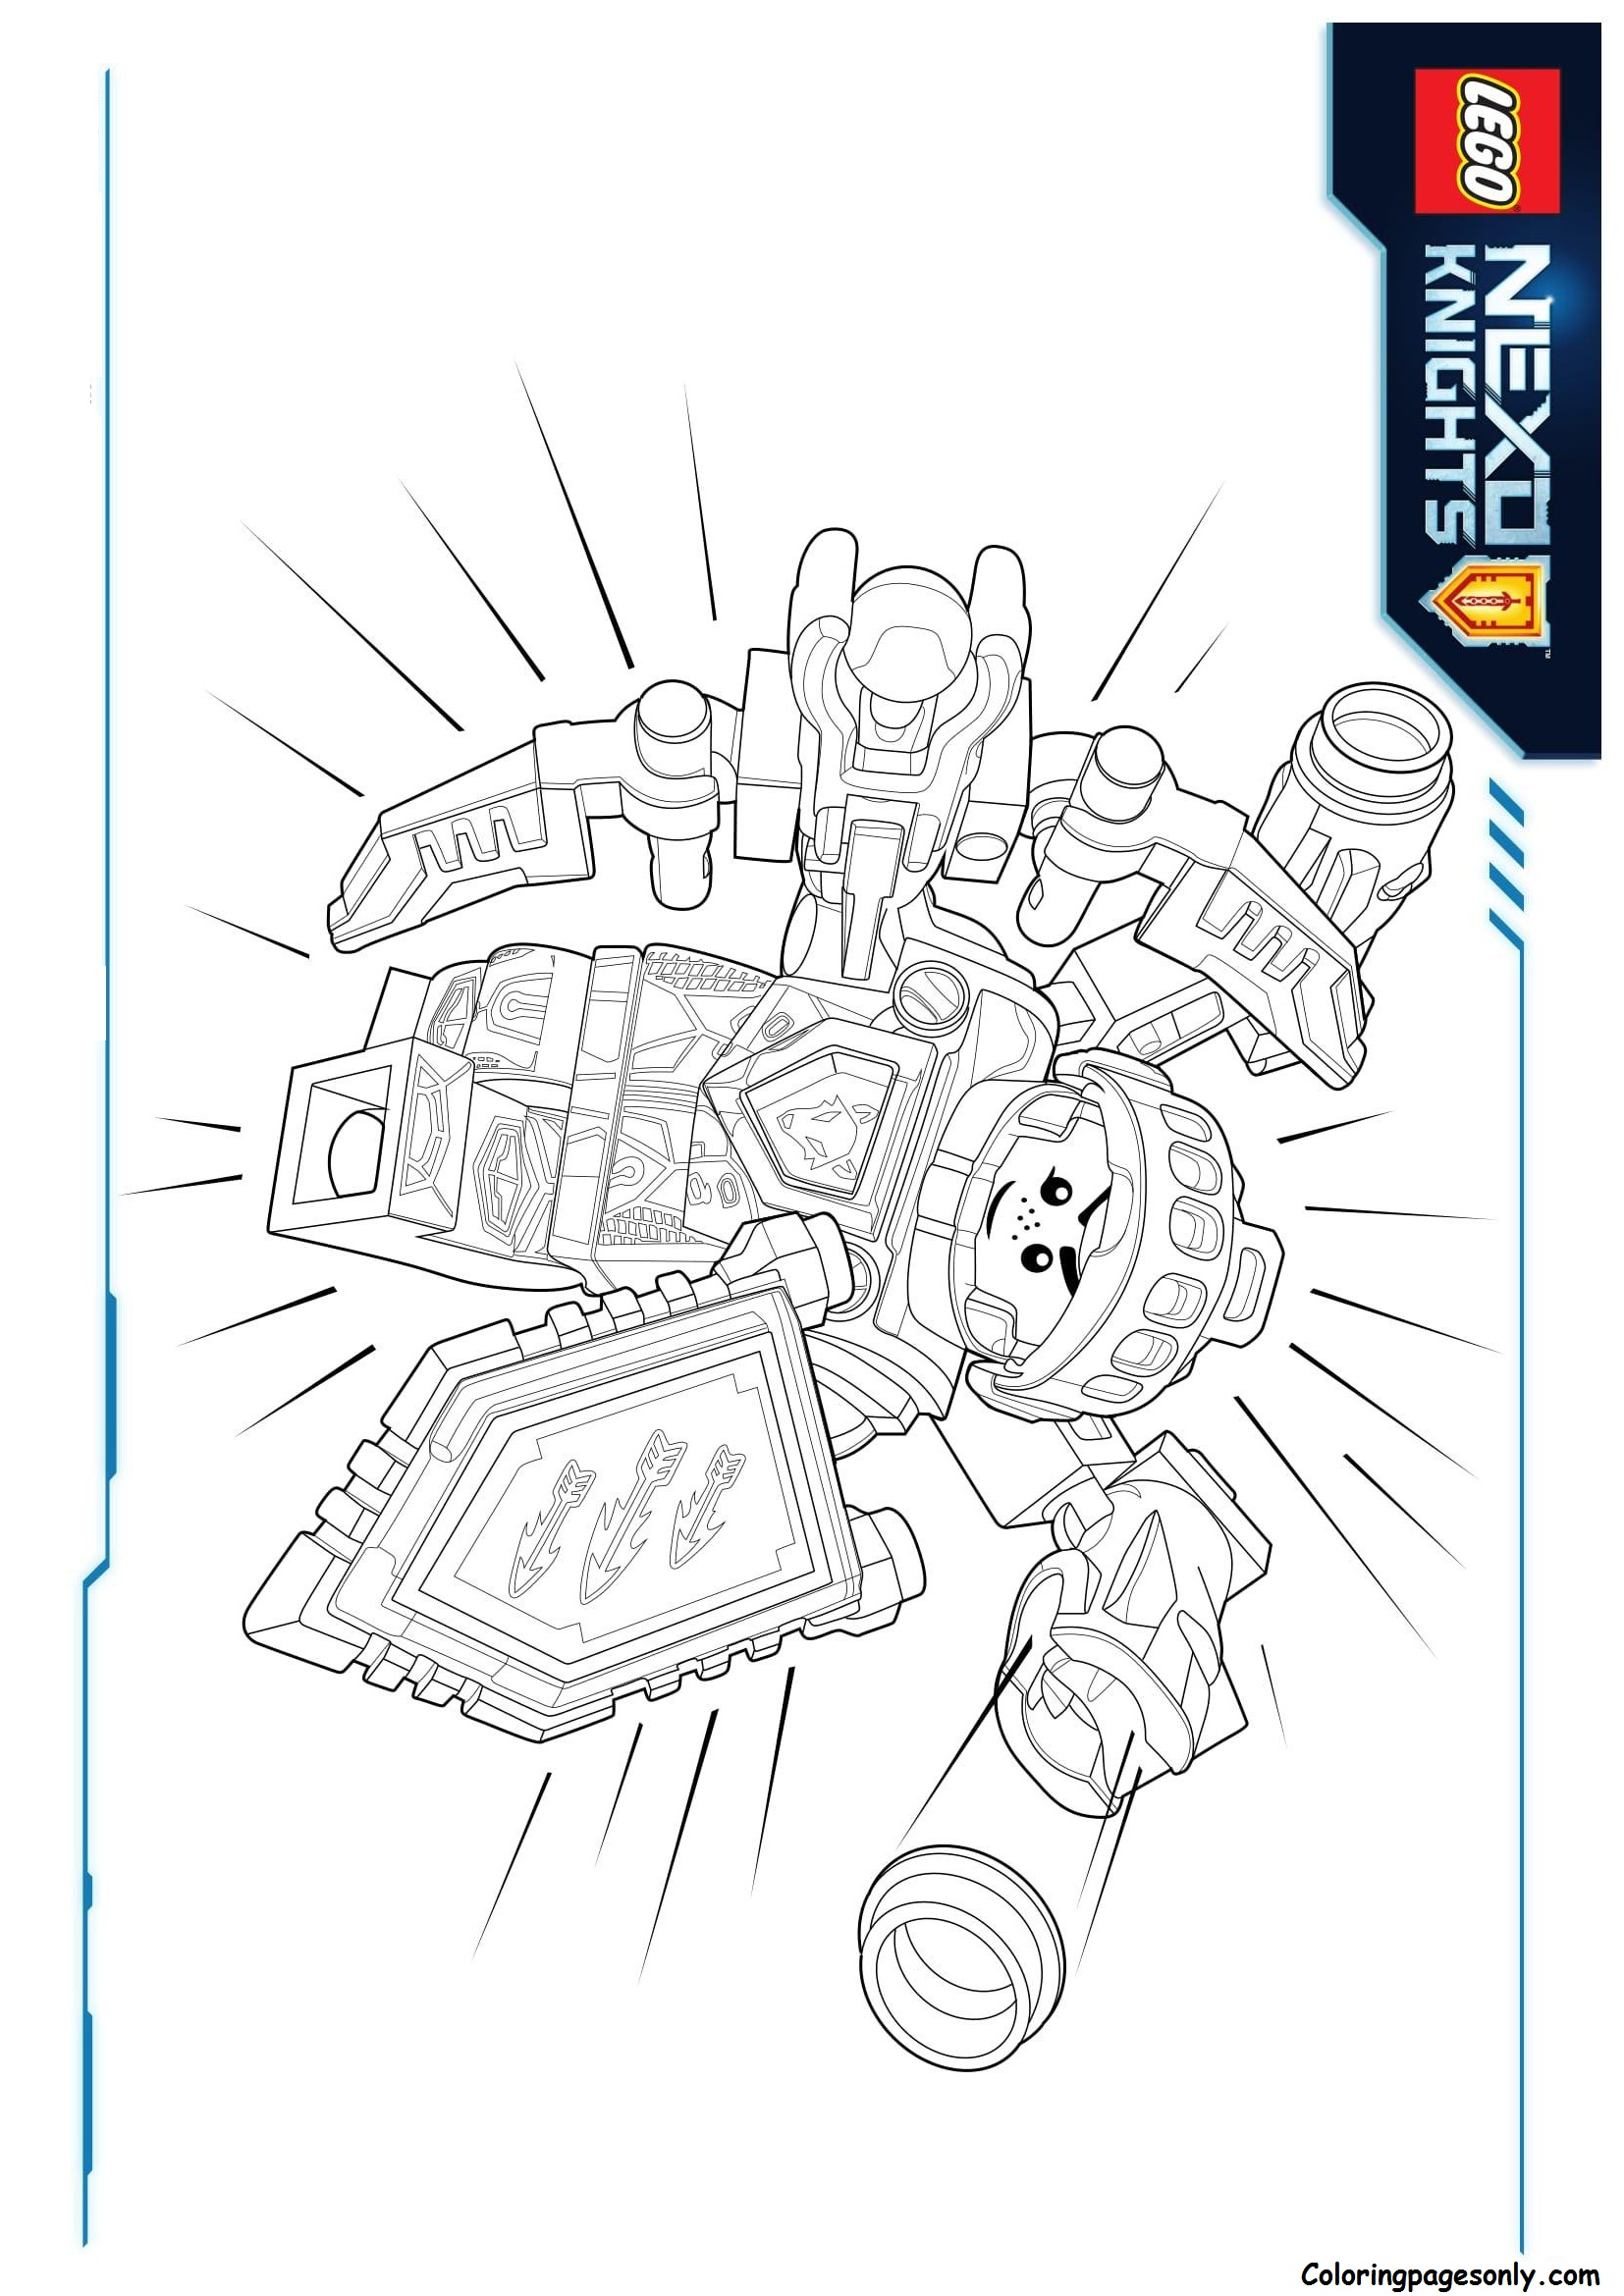 Nexo Knights Coloring Pages Lego Nexo Knights Ultimate Clay Coloring Page Free Coloring Pages